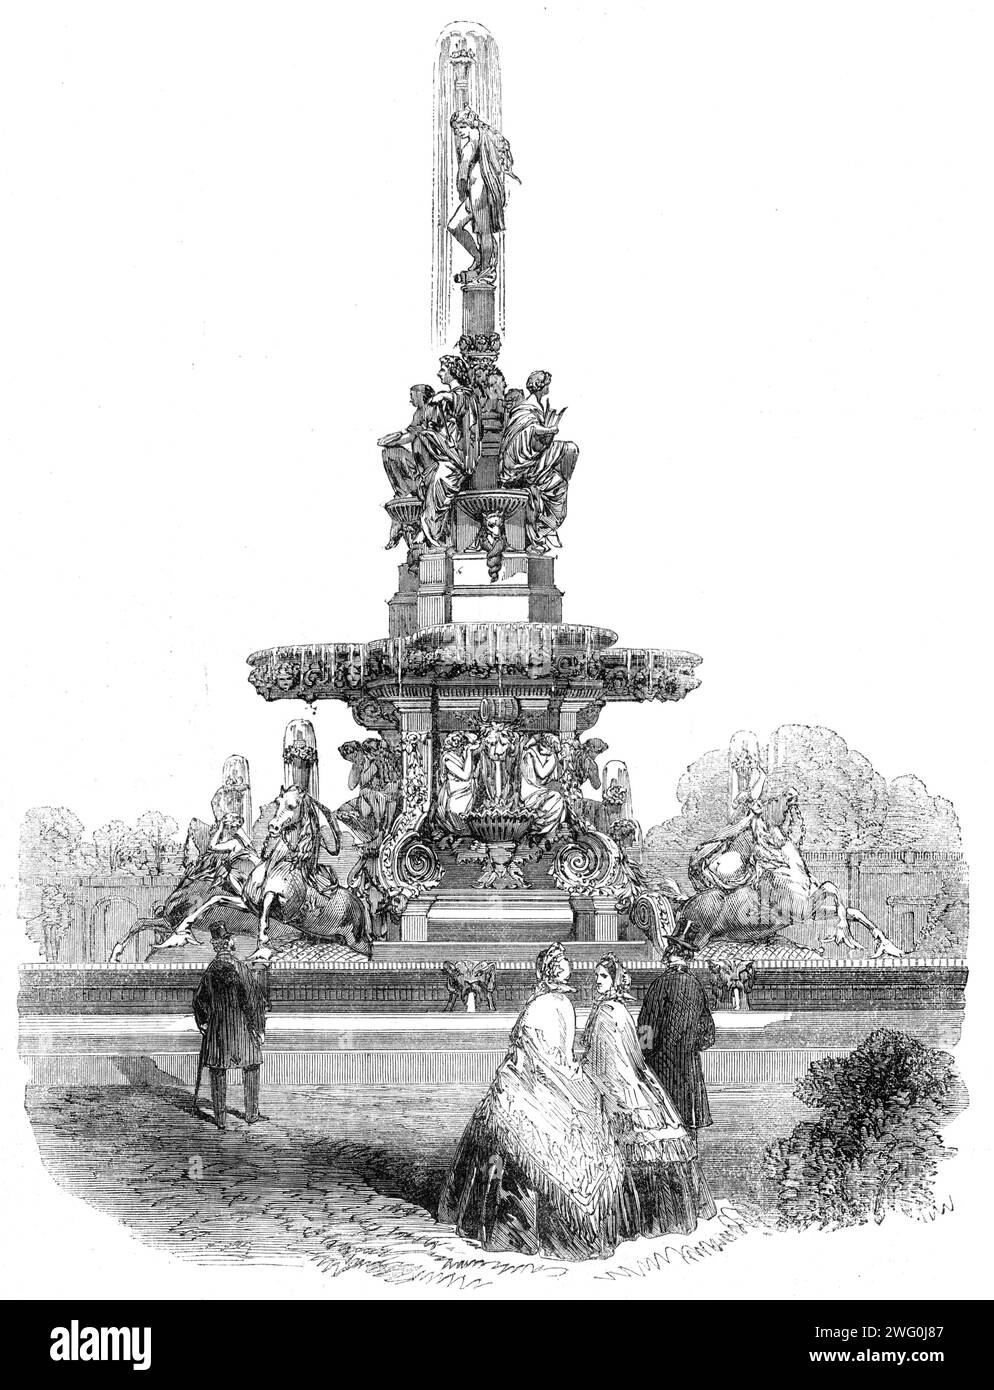 M. Dur&#xe8;ne's Fountain in the Horticultural Society's Gardens, [London], 1862. Engraving from a photograph by L. Birnstingl and Co. Fountain designed by Klagmann. 'The very animated figure at its apex has a cornucopia of very luscious fruits surely; for out of the midst of them the water gushes profusely; the female figures mounted on the seahorses in the lower basin are also supplied with baskets full of the same description of fruit, as from the centre pines (should they not be water melons) the water spouts with similar profusion. The seahorses champ their seaweed bridles and show capita Stock Photo